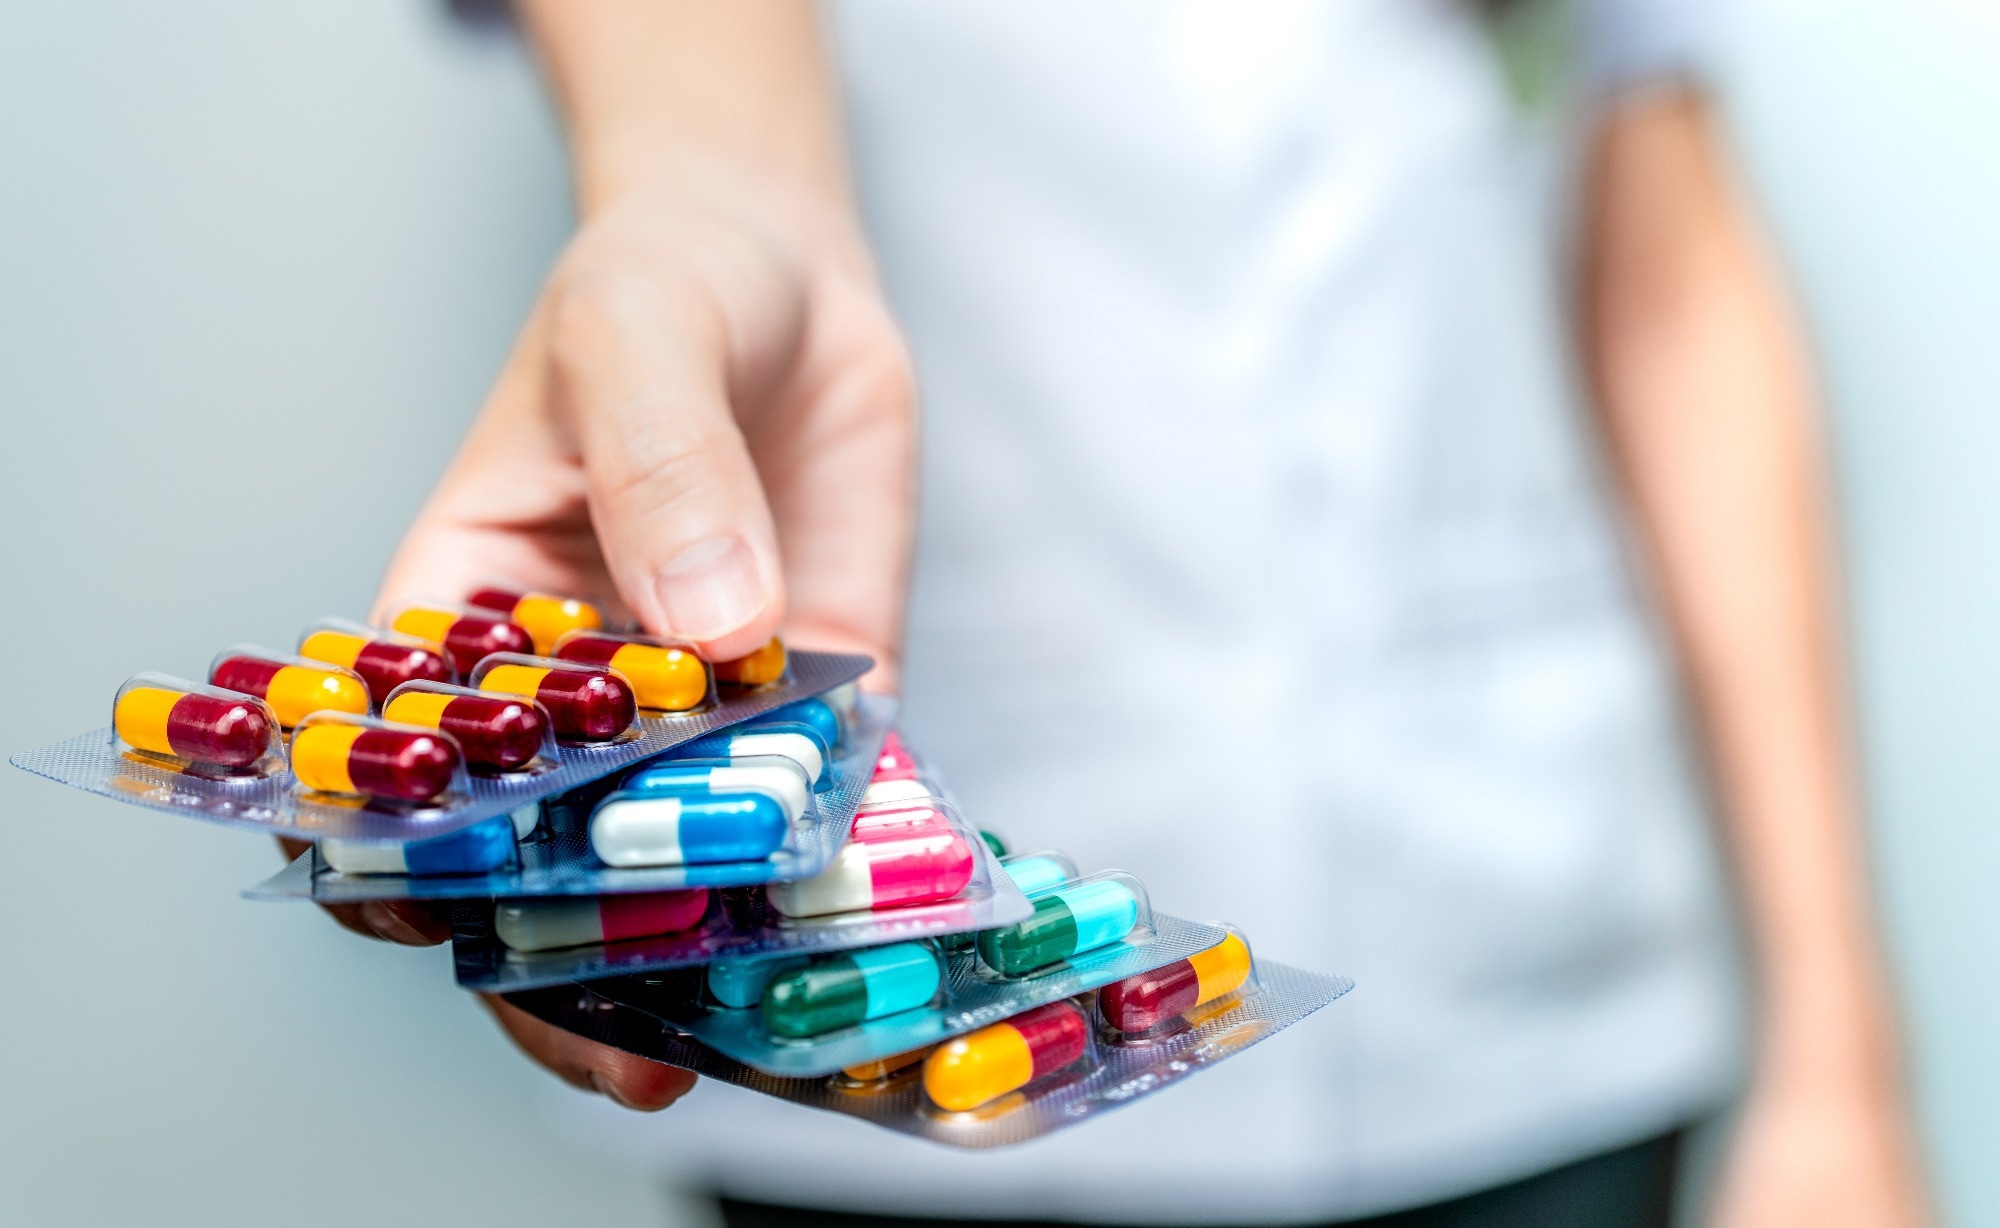 Study: The uncertain role of substandard and falsified medicines in the emergence and spread of antimicrobial resistance. Image Credit: Fahroni/Shutterstock.com